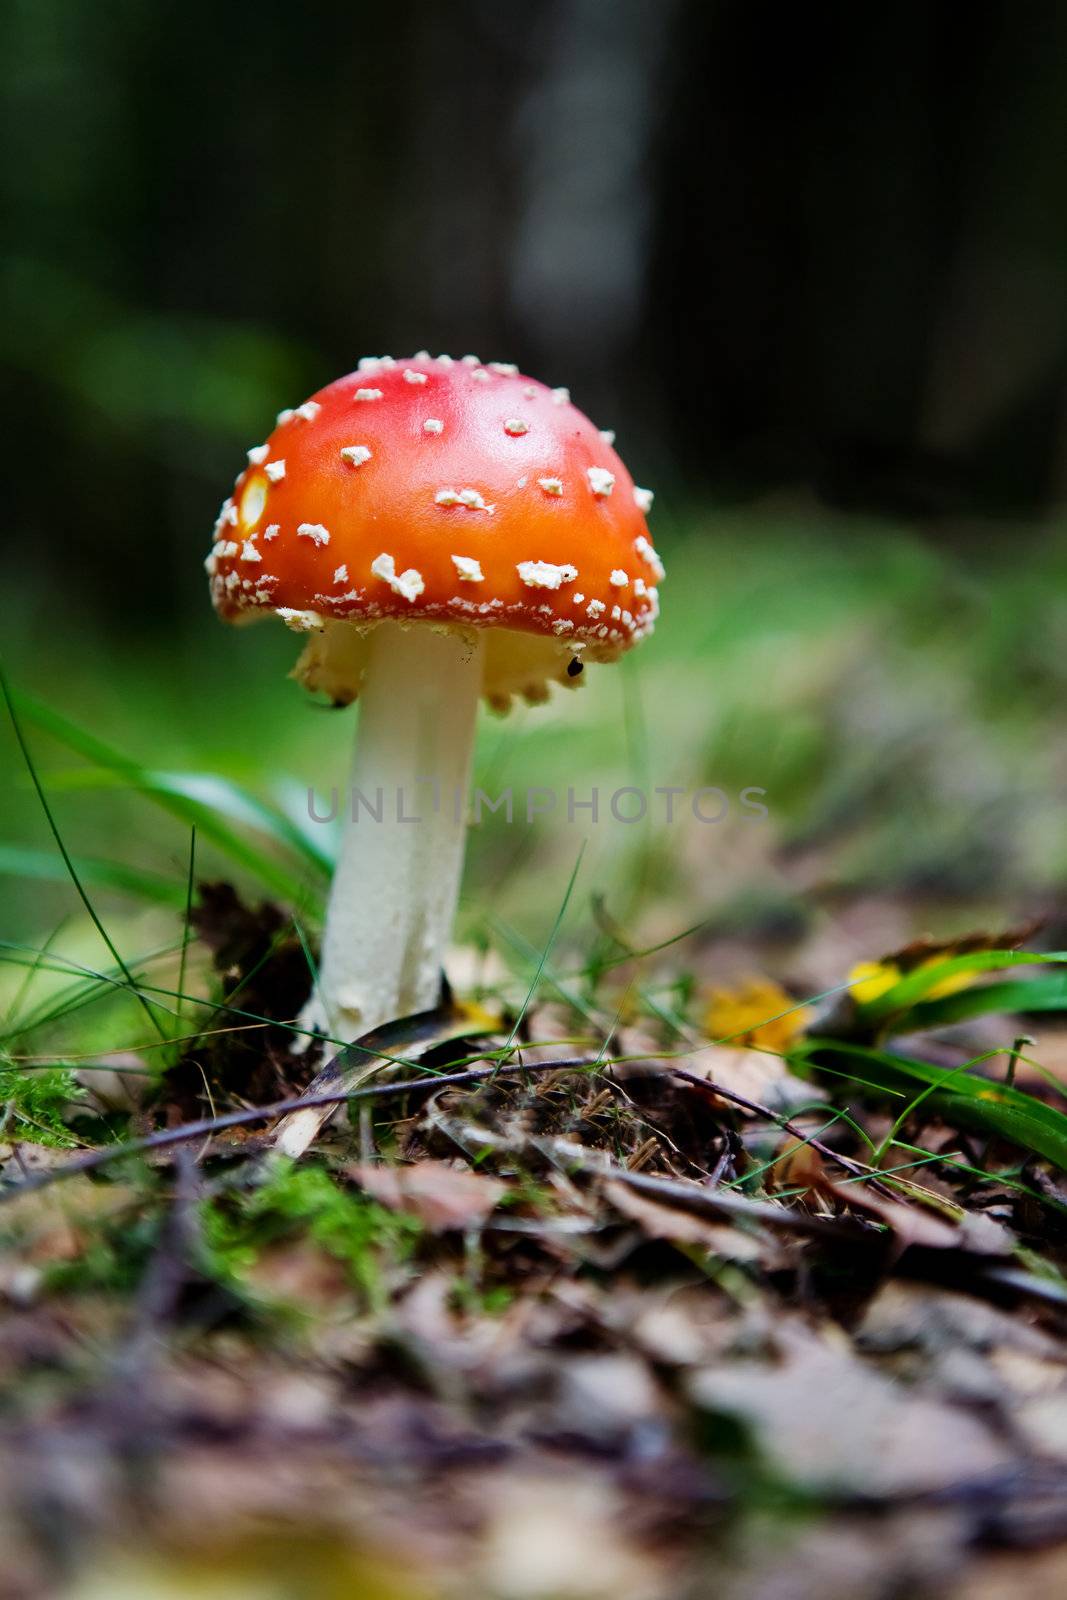 A magic mushroom in the forest - fly Amanita